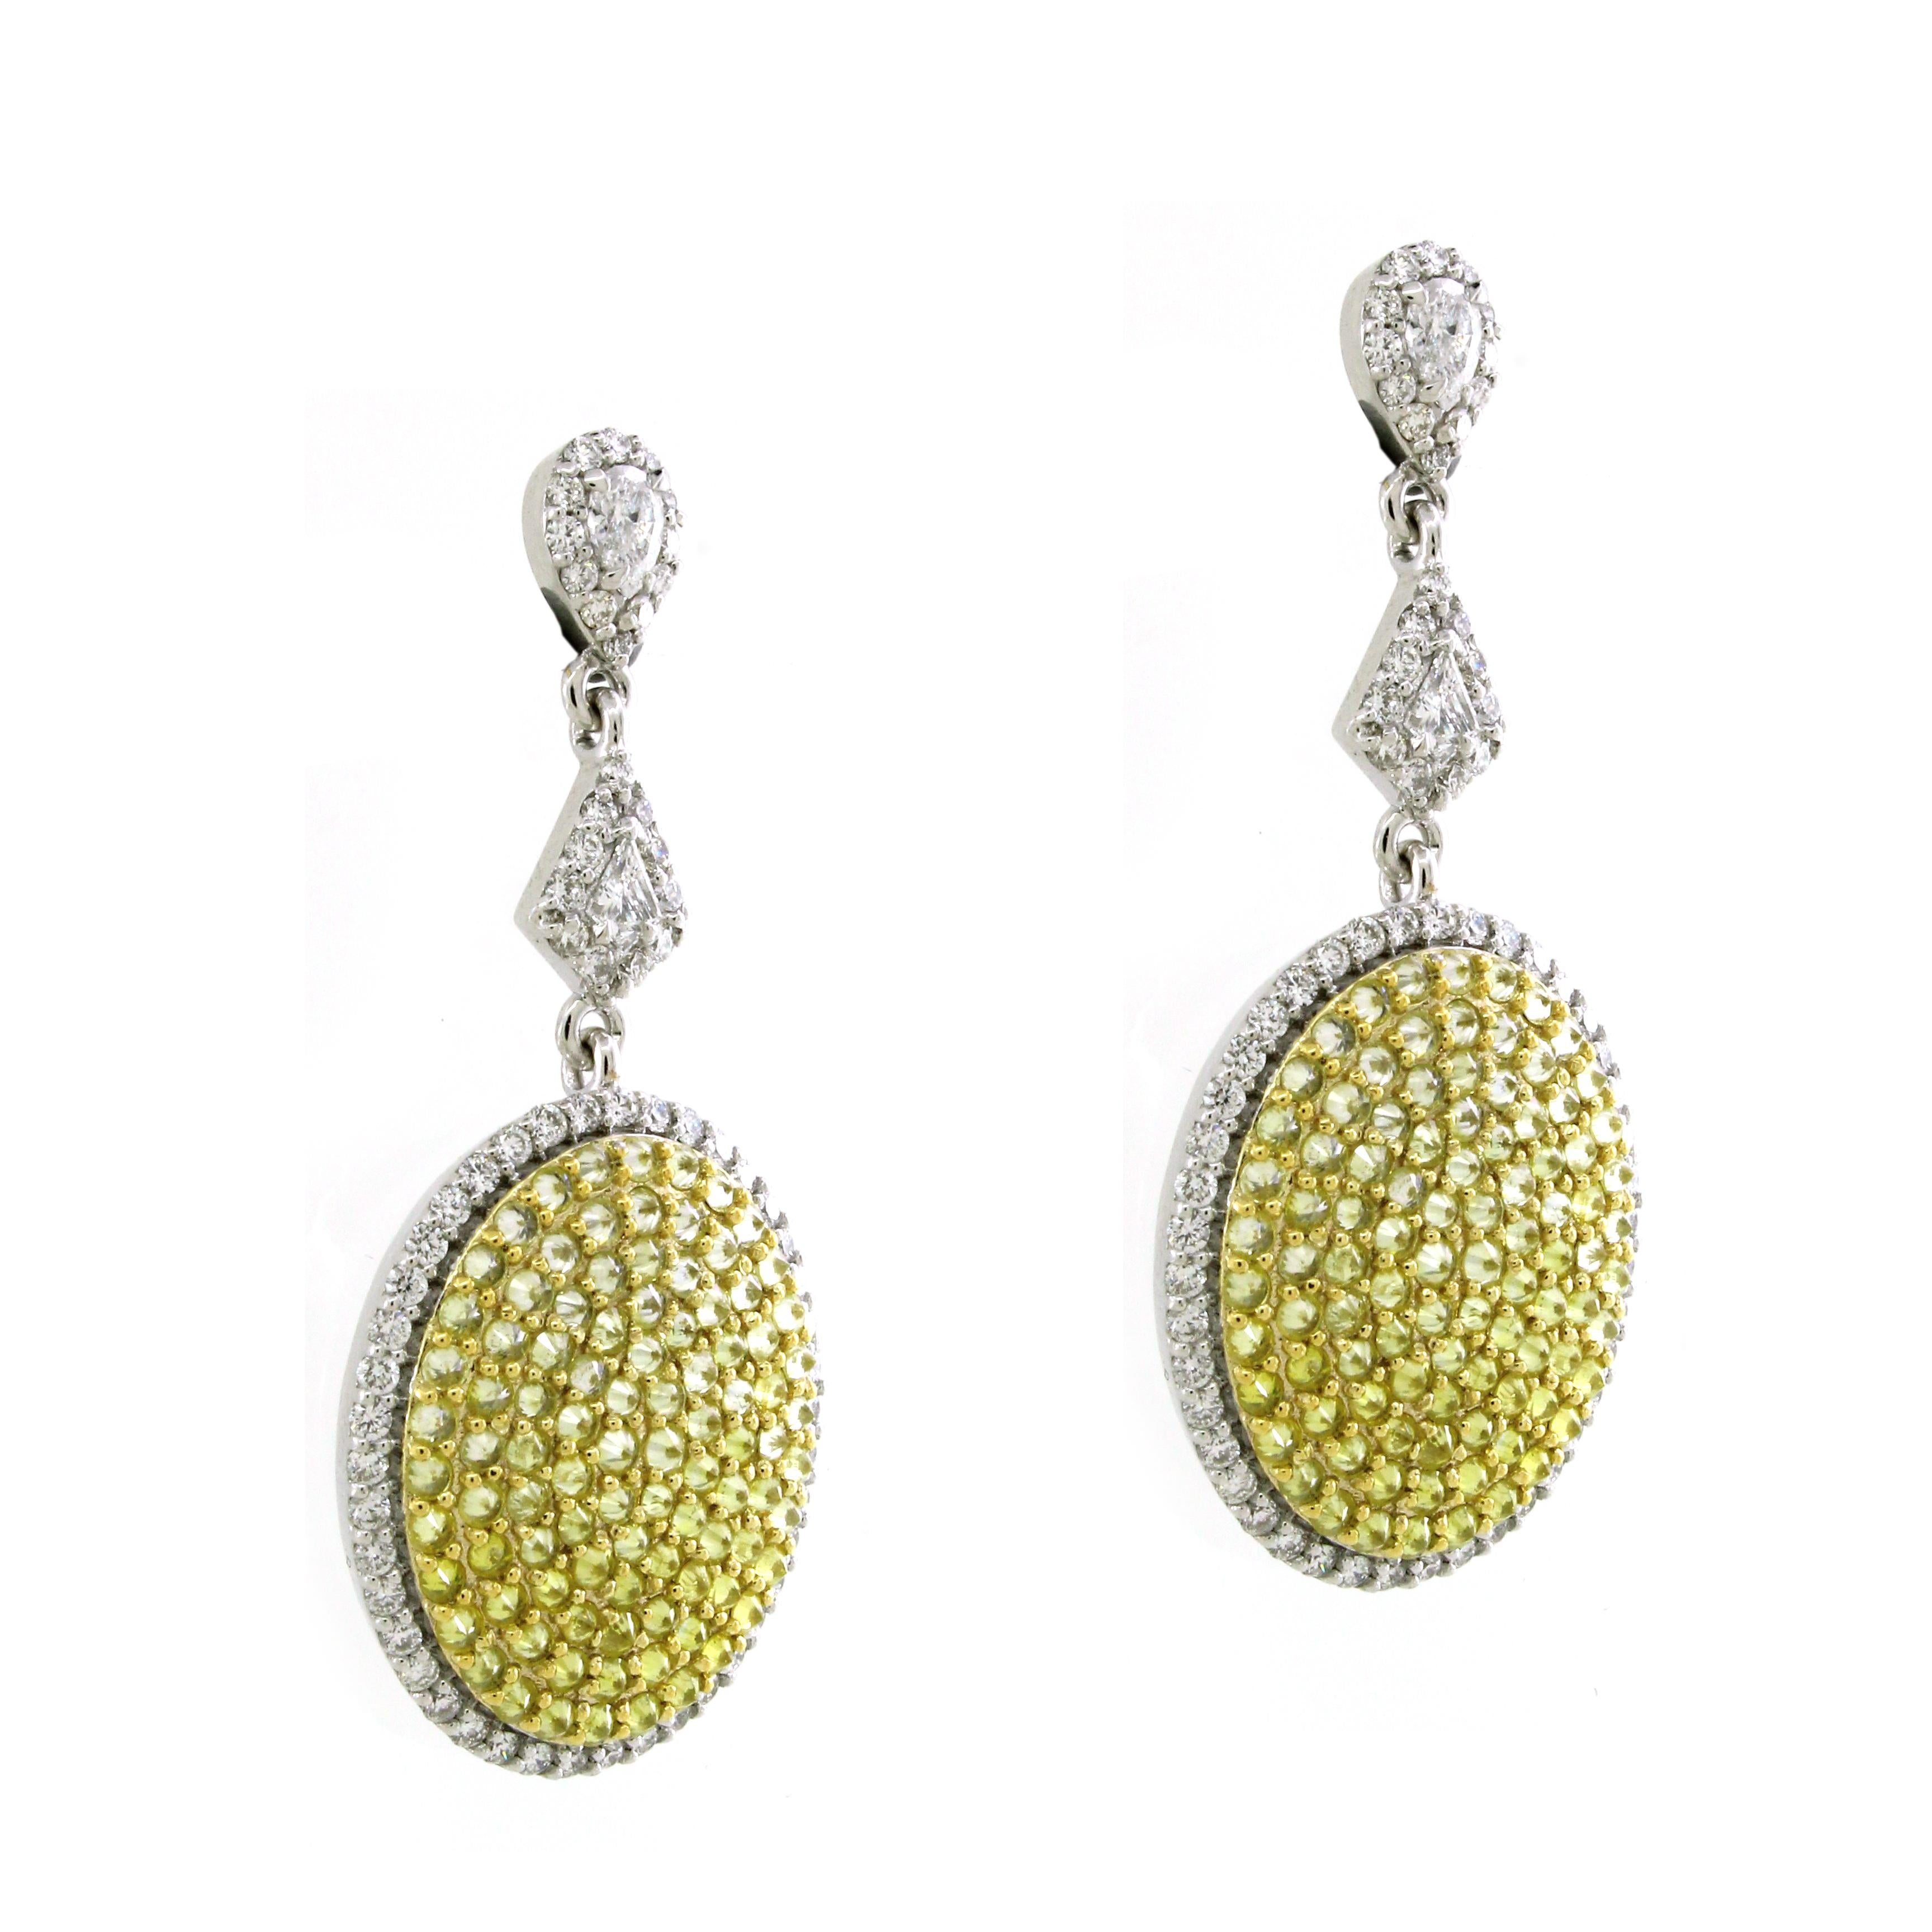 Introducing a pair of breathtaking dangling earrings that harmoniously blend classic elegance with a touch of modern extravagance.
At the heart of each earring, you'll find two mesmerizing white pear-cut diamonds, weighing total of 0.17 carats.